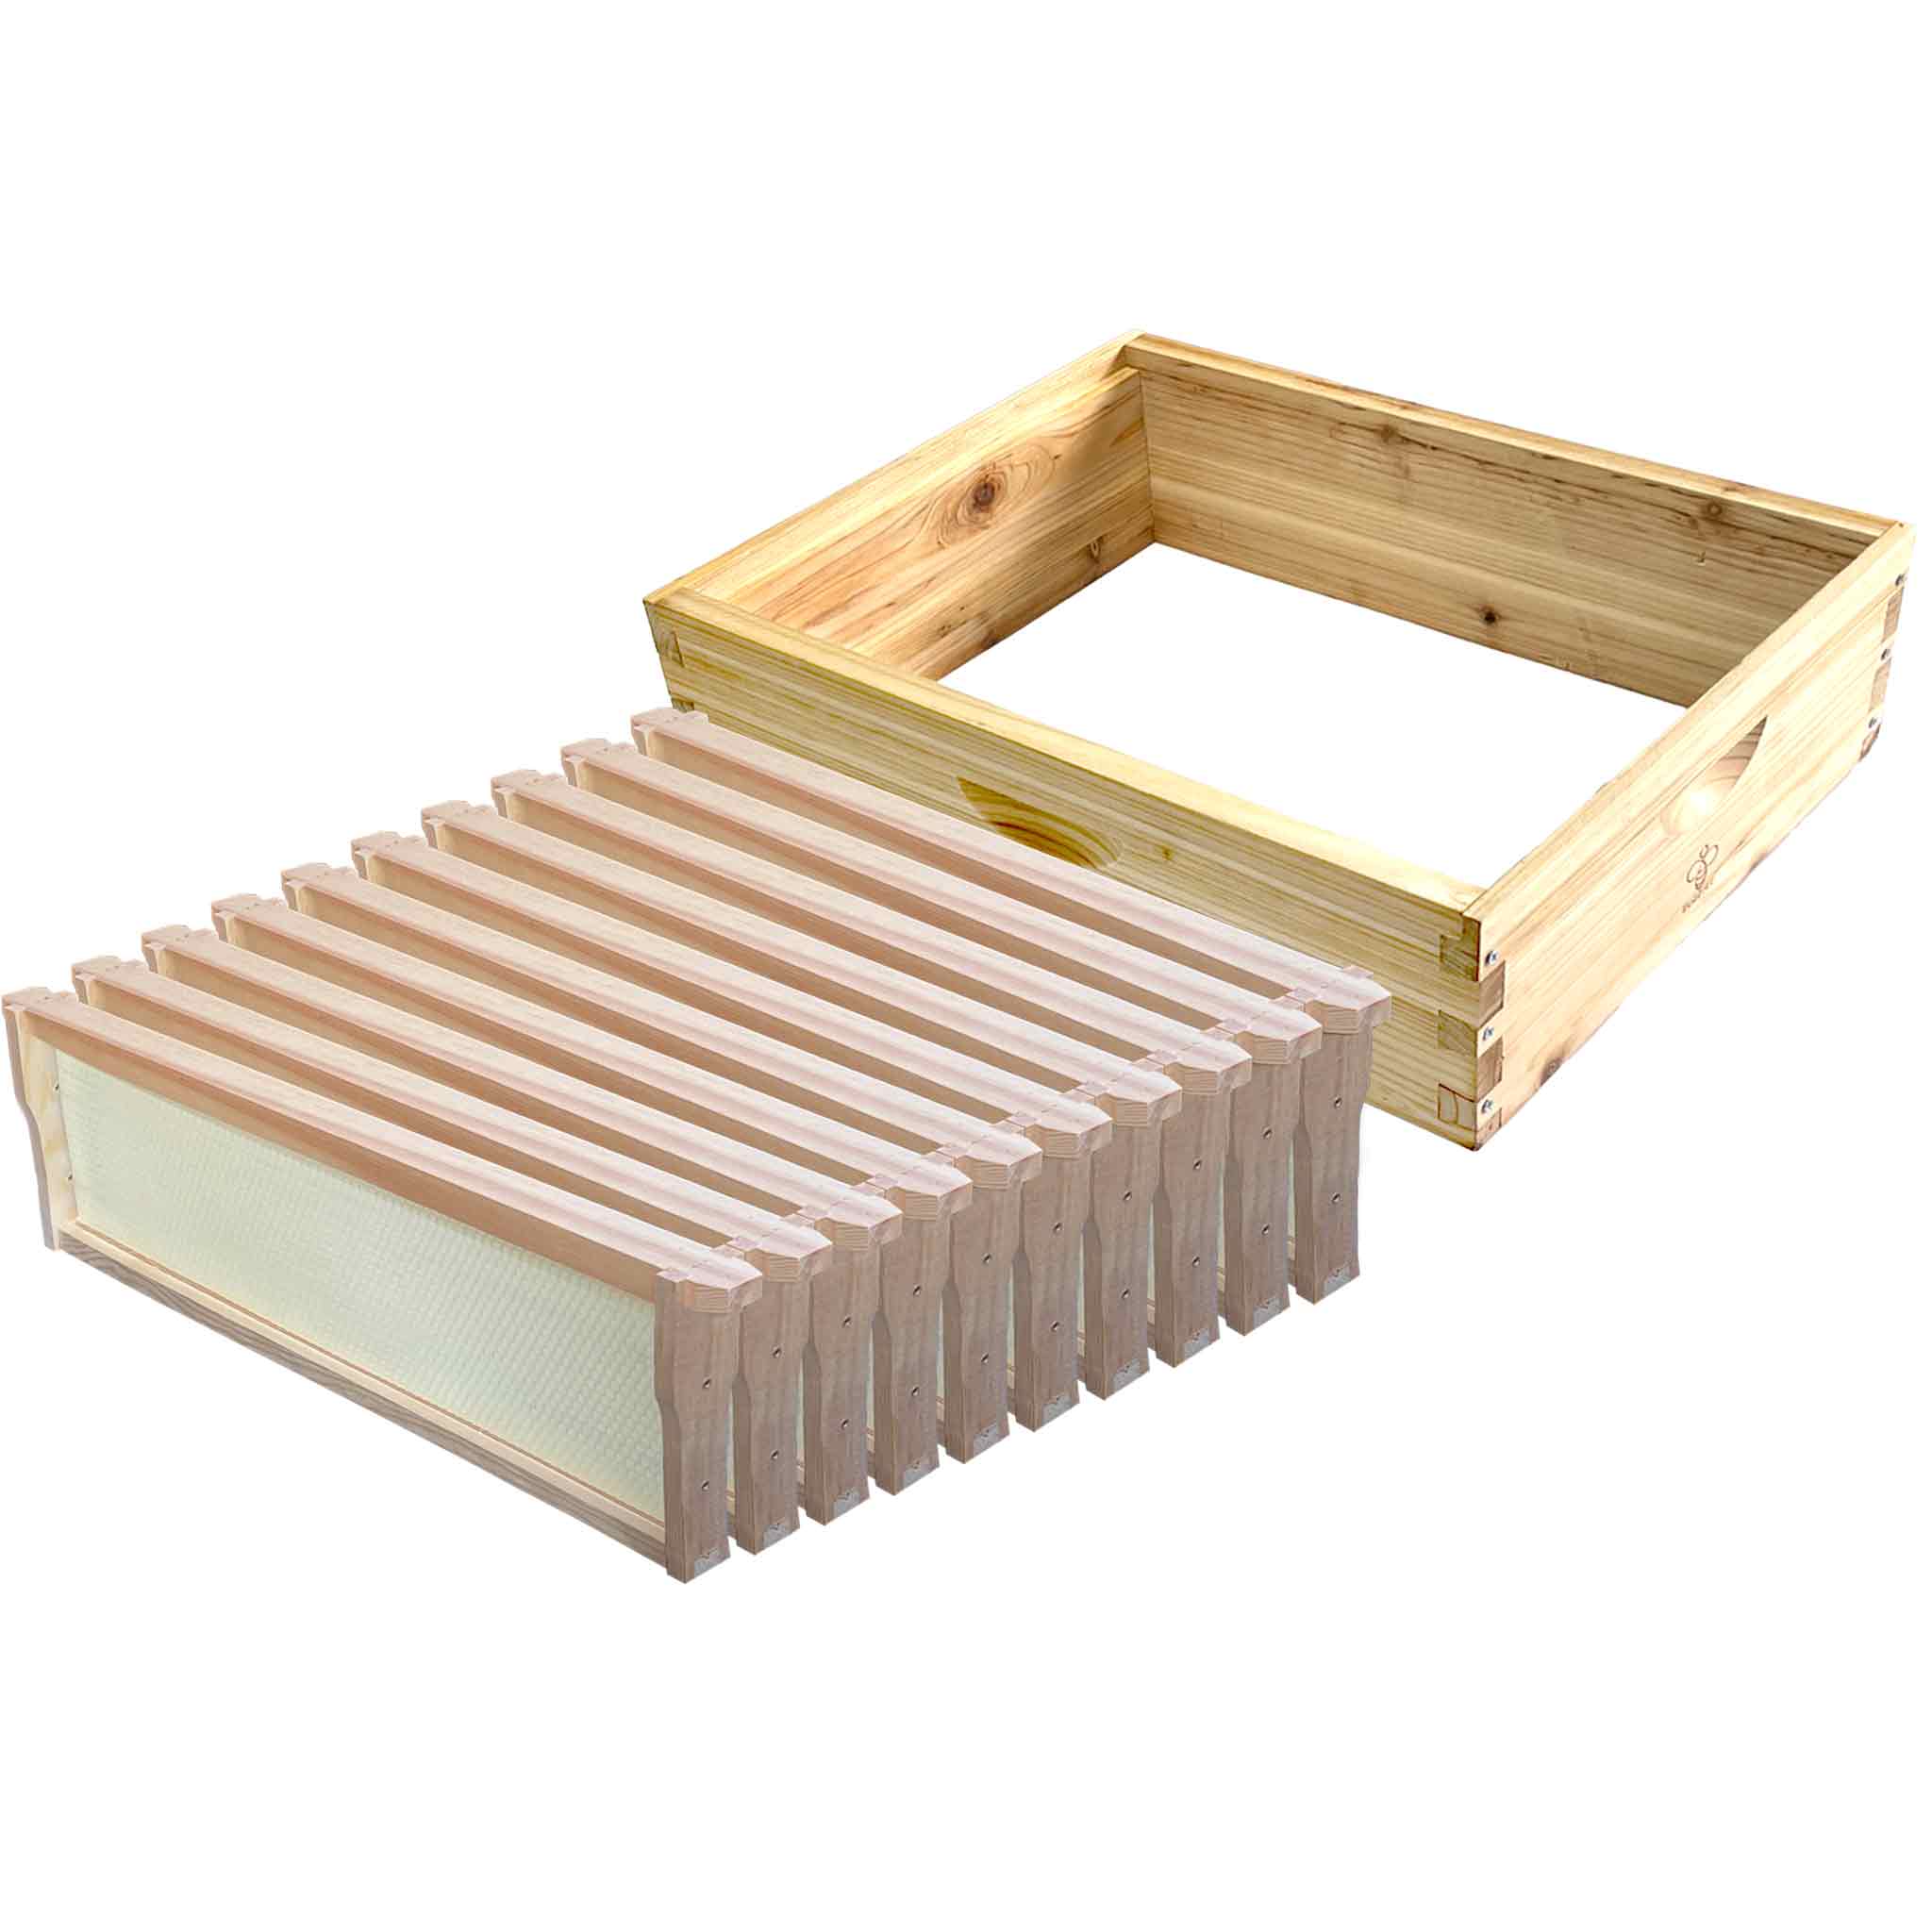 Ideal Size Box Super Add-on Kit - Hive Parts Kits collection by Buzzbee Beekeeping Supplies